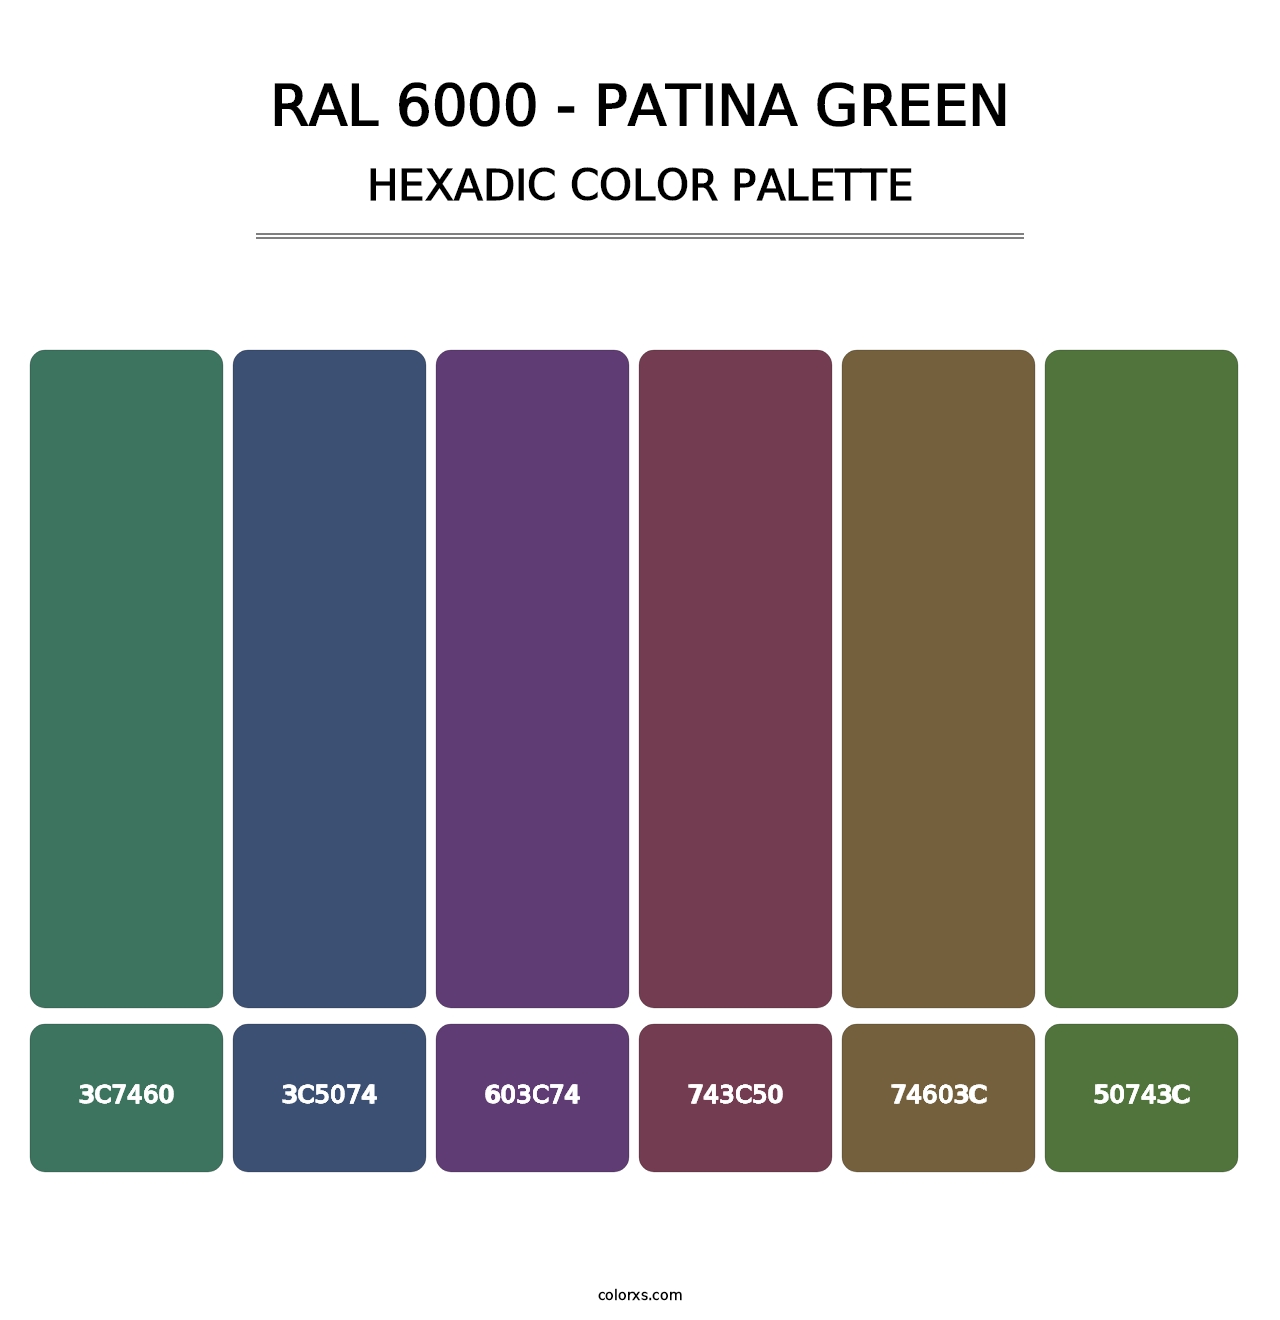 RAL 6000 - Patina Green - Hexadic Color Palette